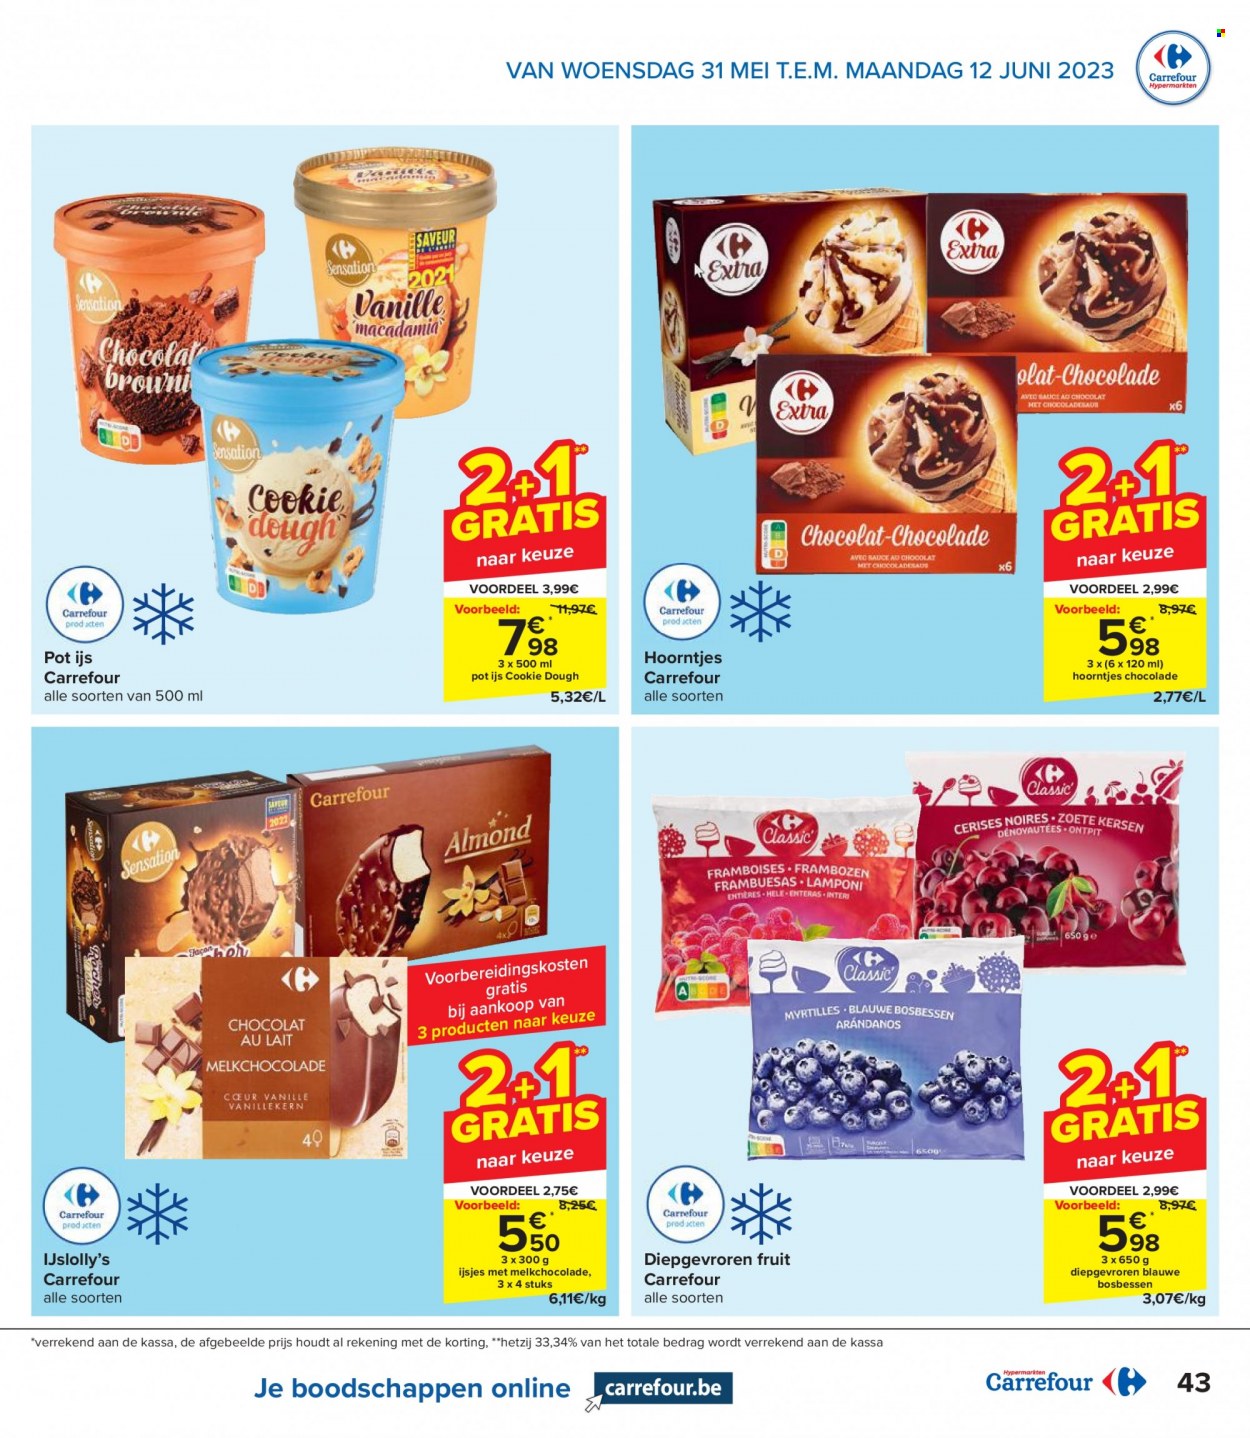 Catalogue Carrefour hypermarkt - 31.5.2023 - 12.6.2023. Page 43.